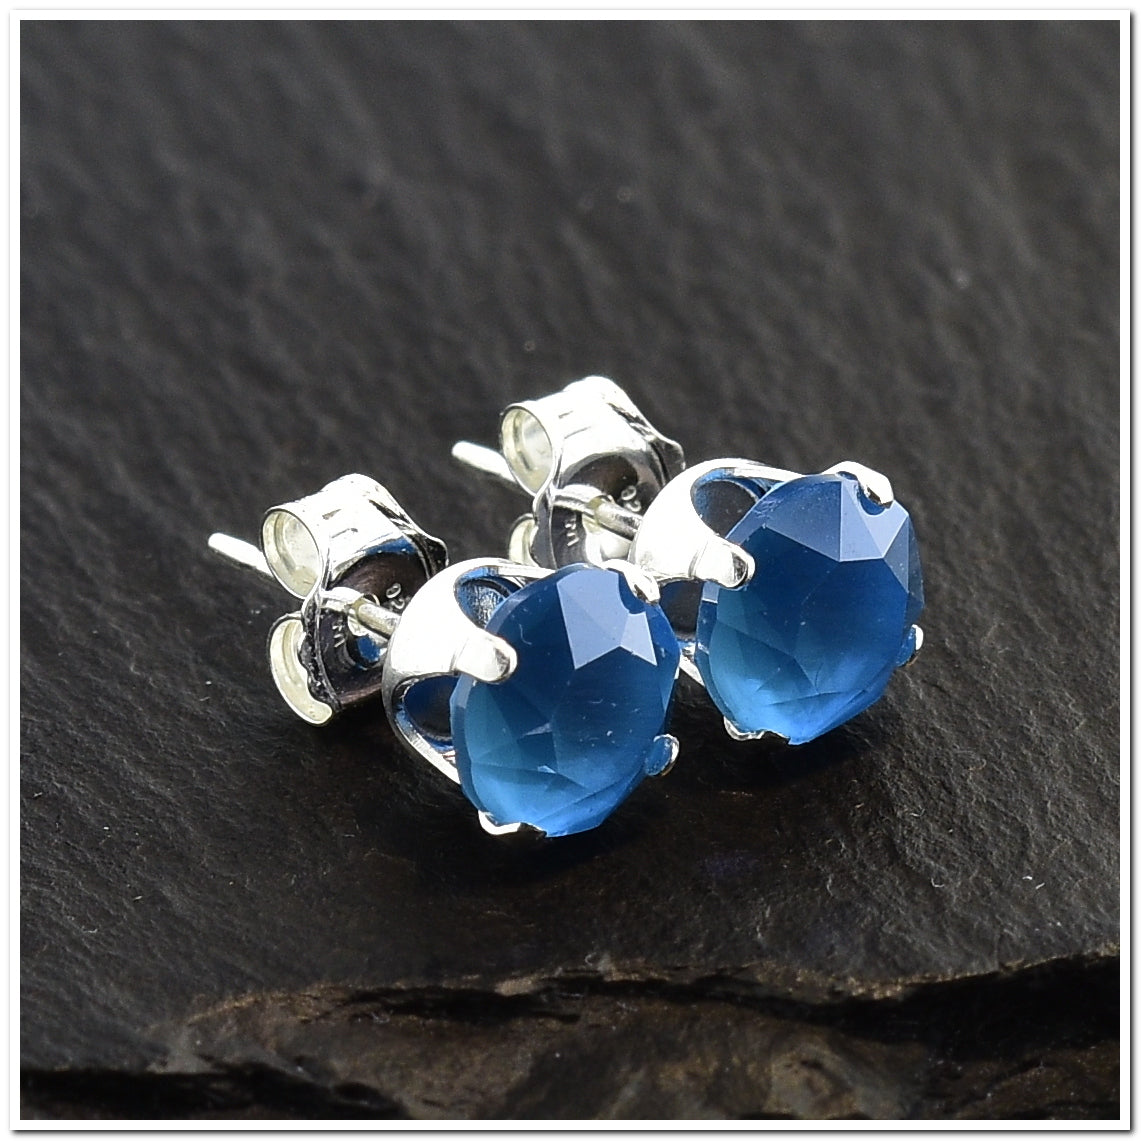 pewterhooter® Women's Classic Collection 925 Sterling silver earrings with sparkling Azure Blue crystals, packaged in a gift box for any occasion.